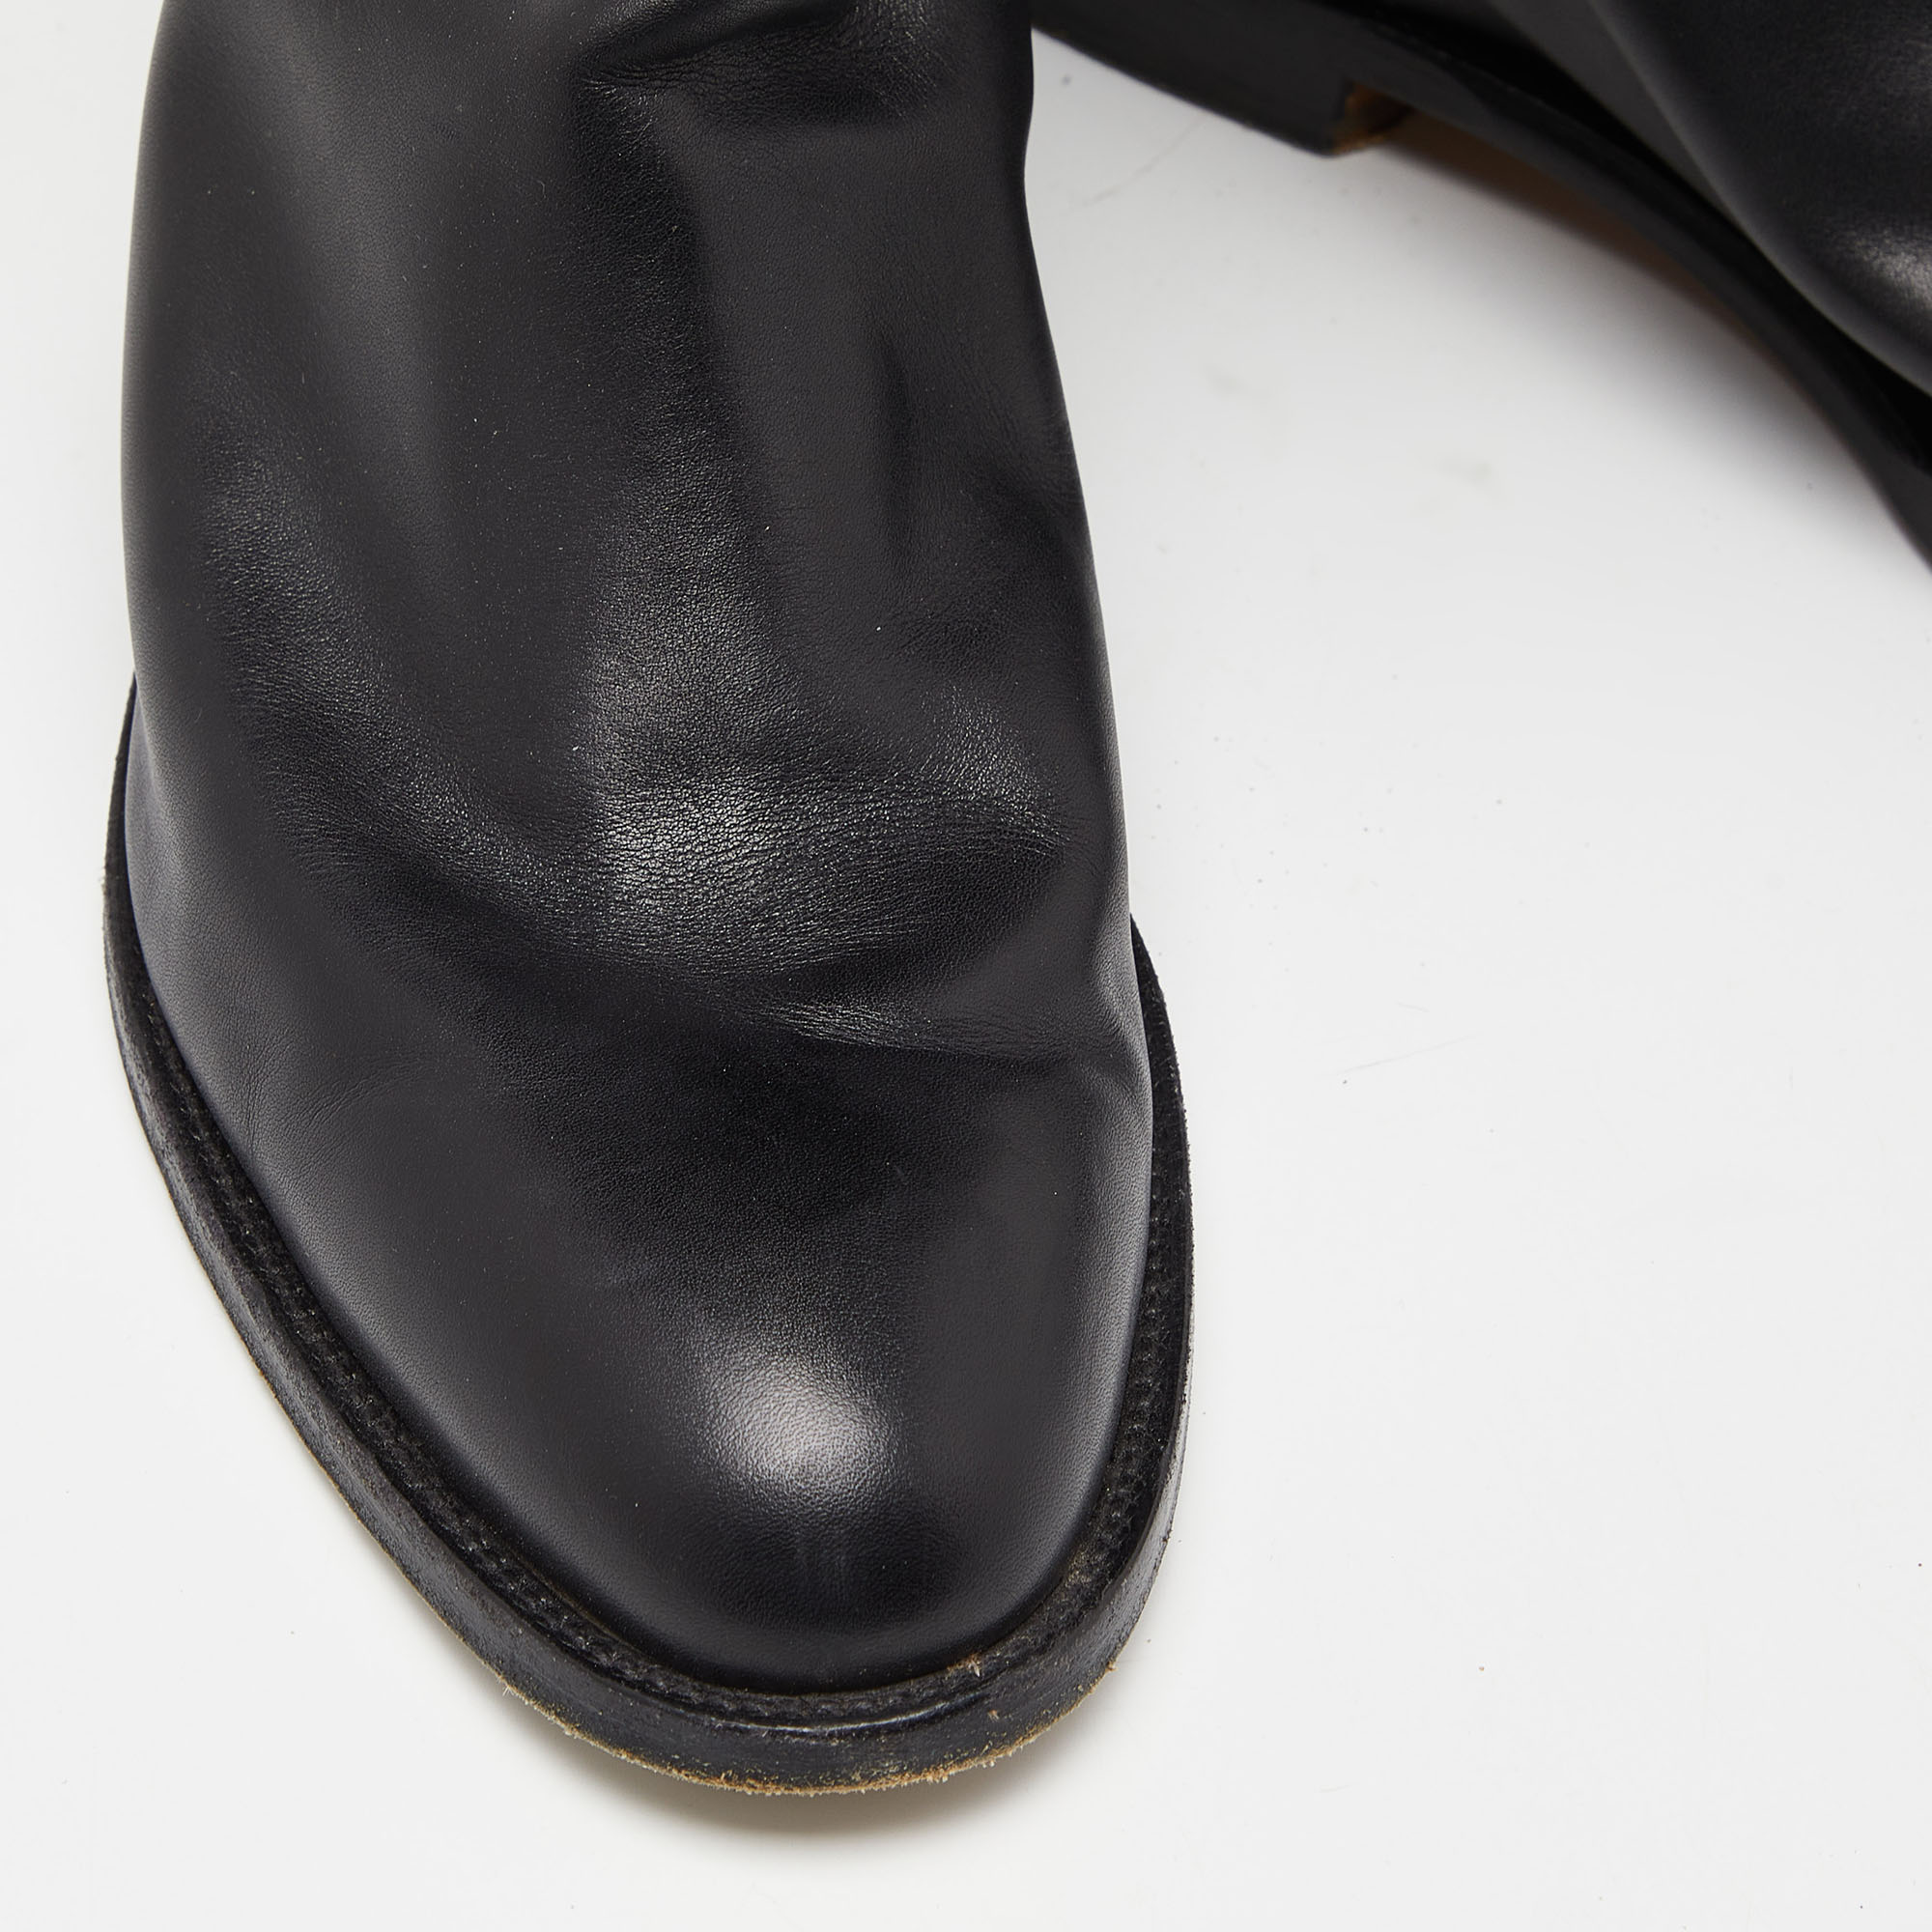 Hermes Black Leather Jumping Boots Size 40